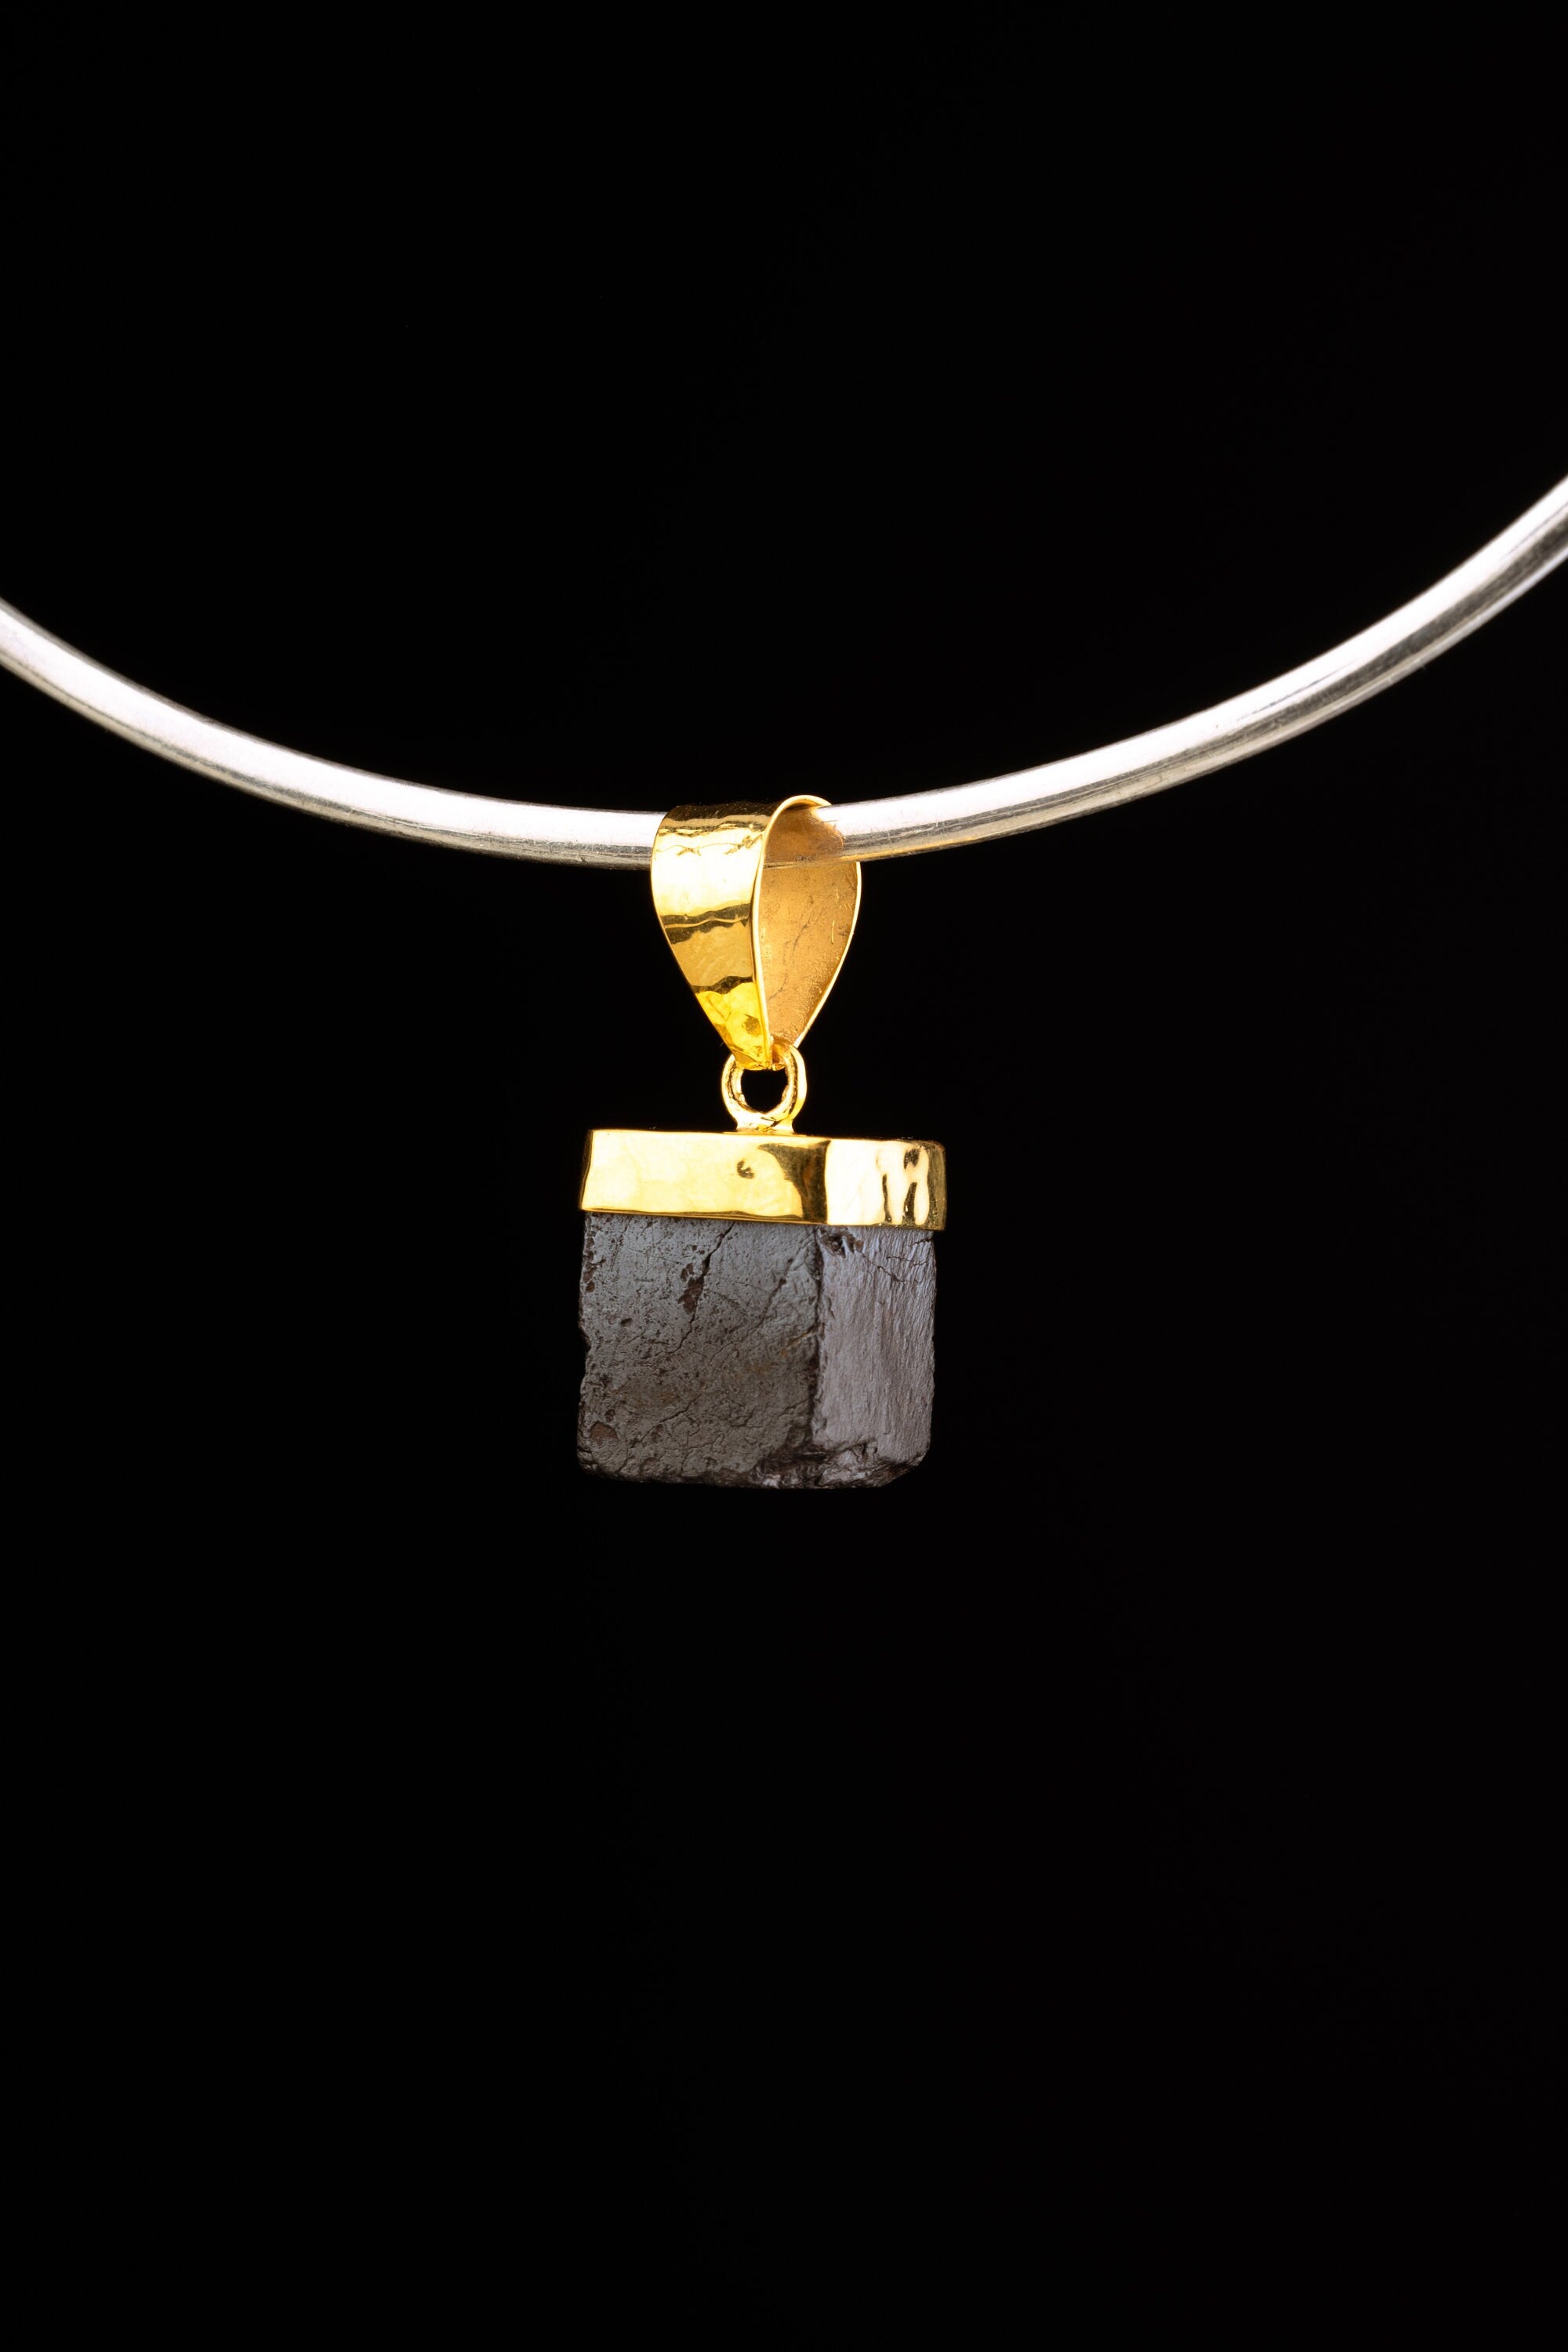 Well formed raw Cubic Australian Pyrite necklace - Gold Plated Textured Sterling Silver Cap Setting - Crystal Pendant